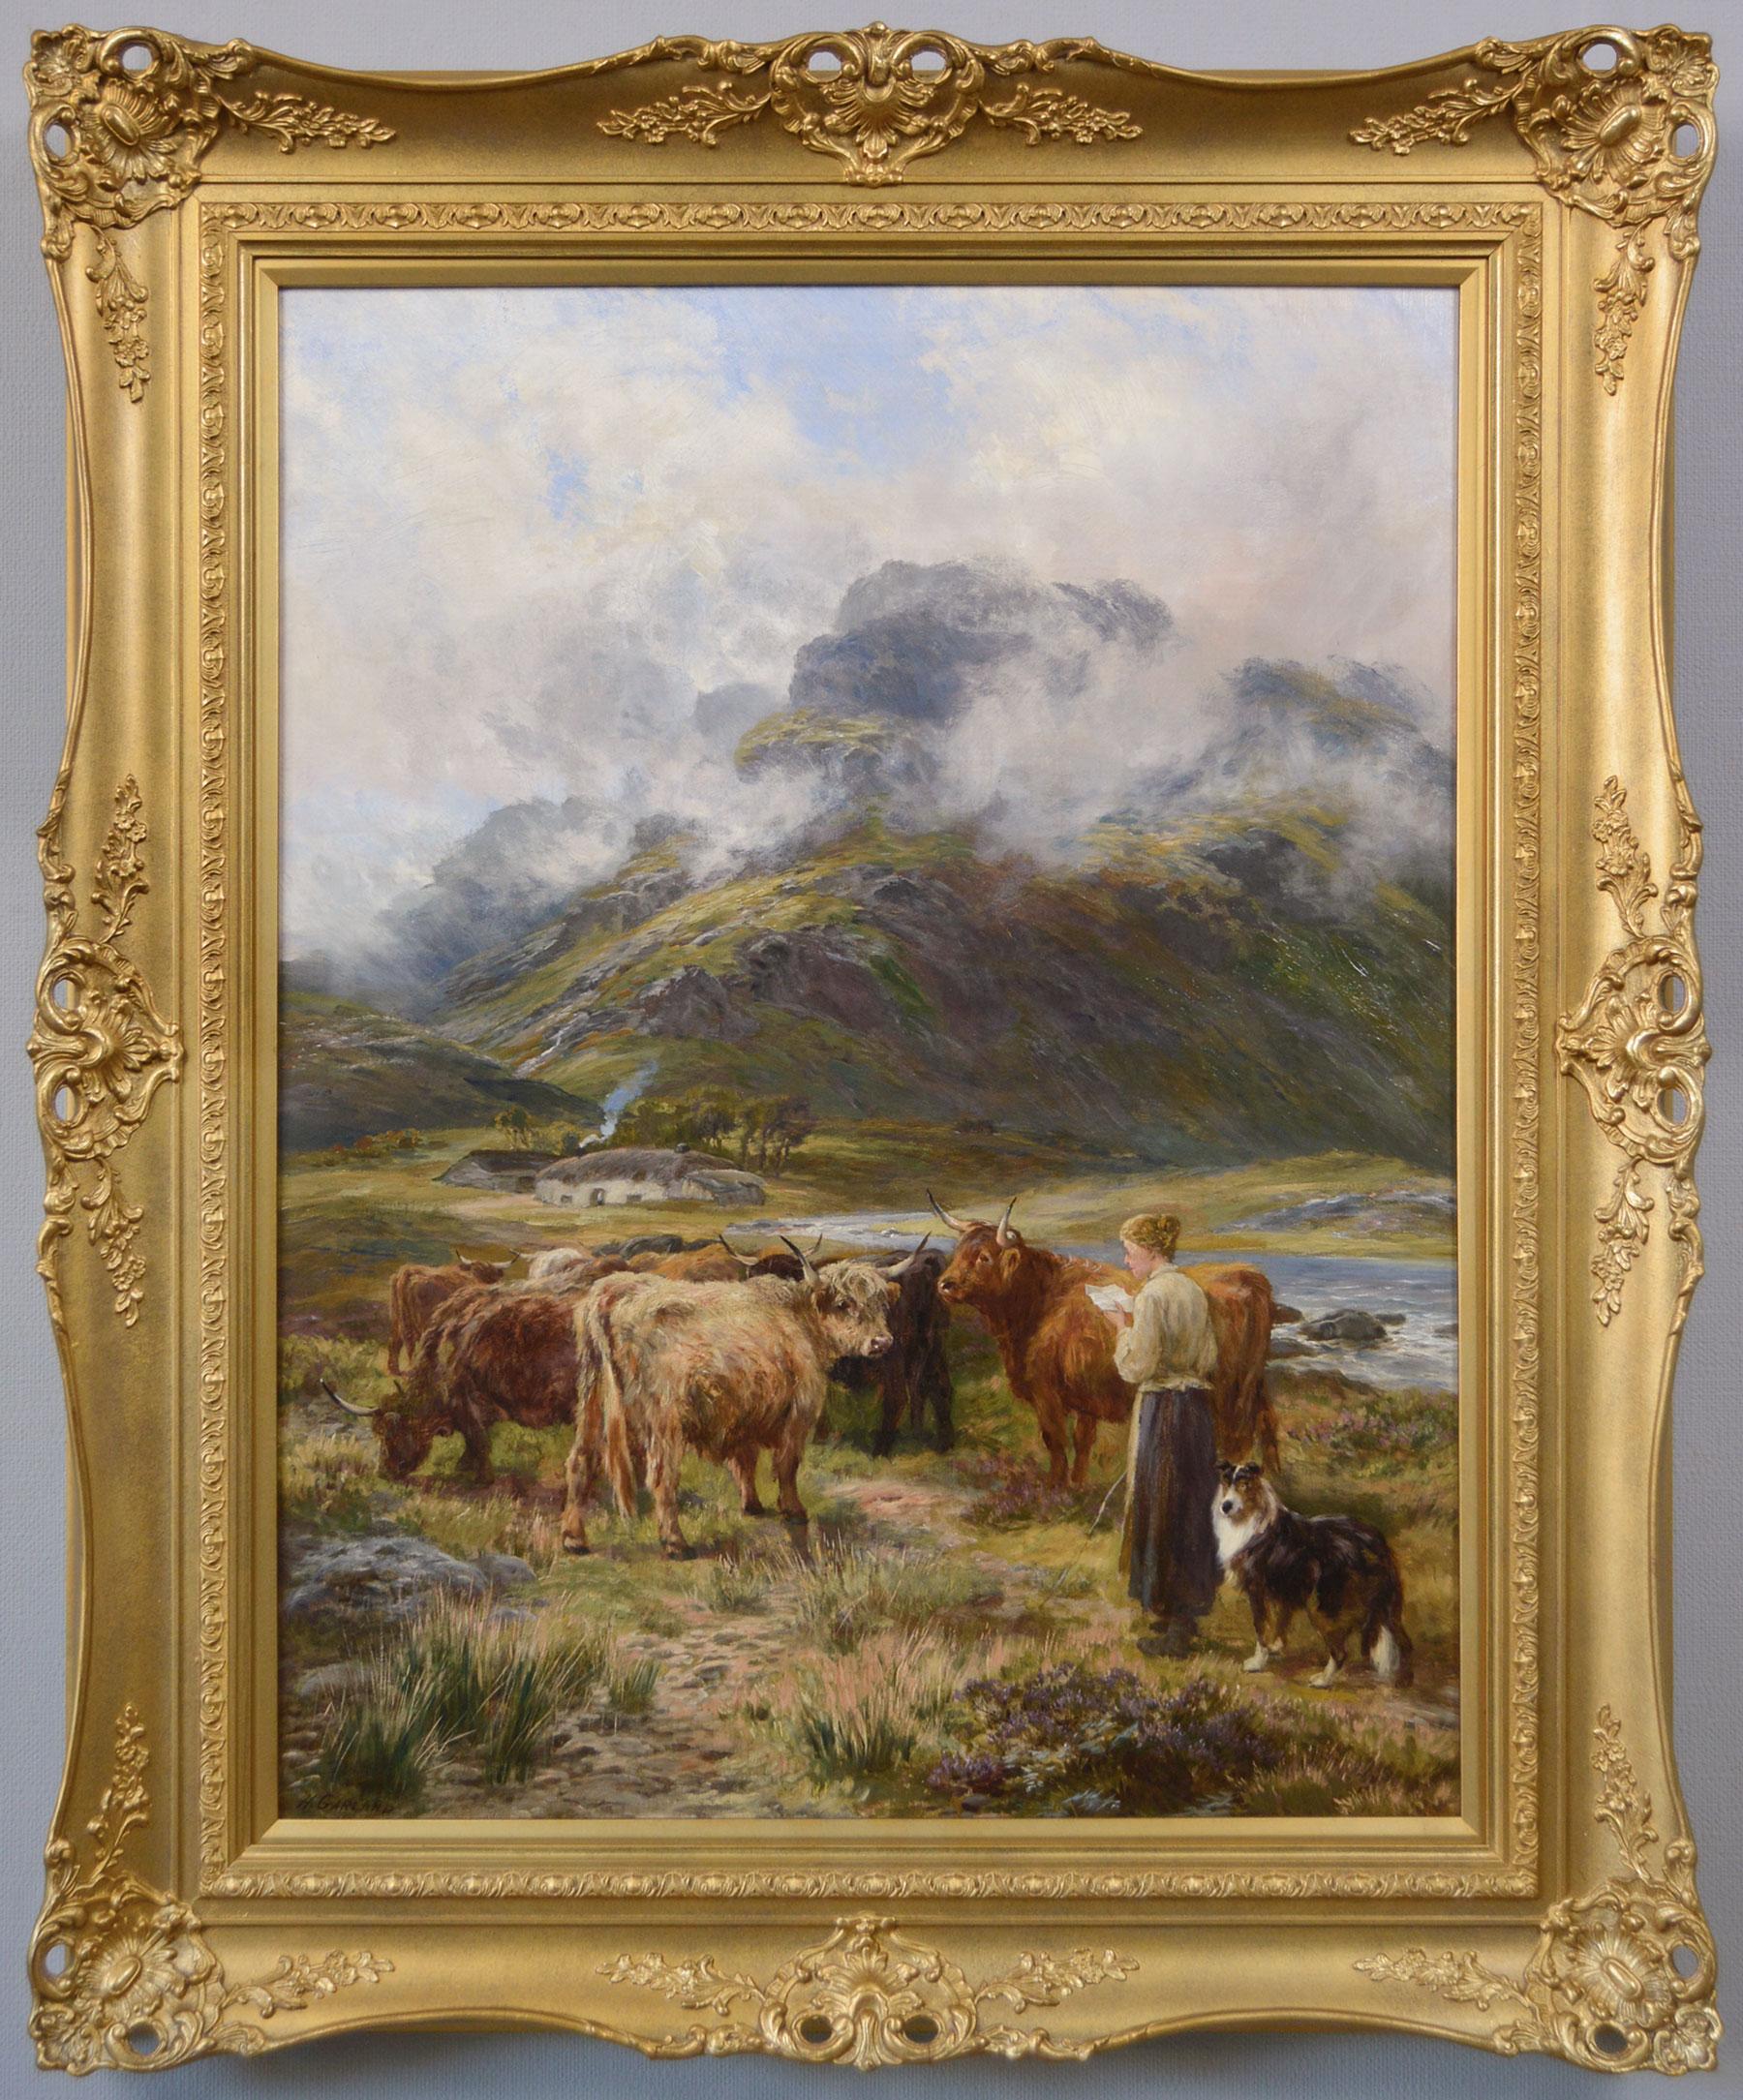 19th Century Scottish landscape oil painting of a figure with Highland Cattle